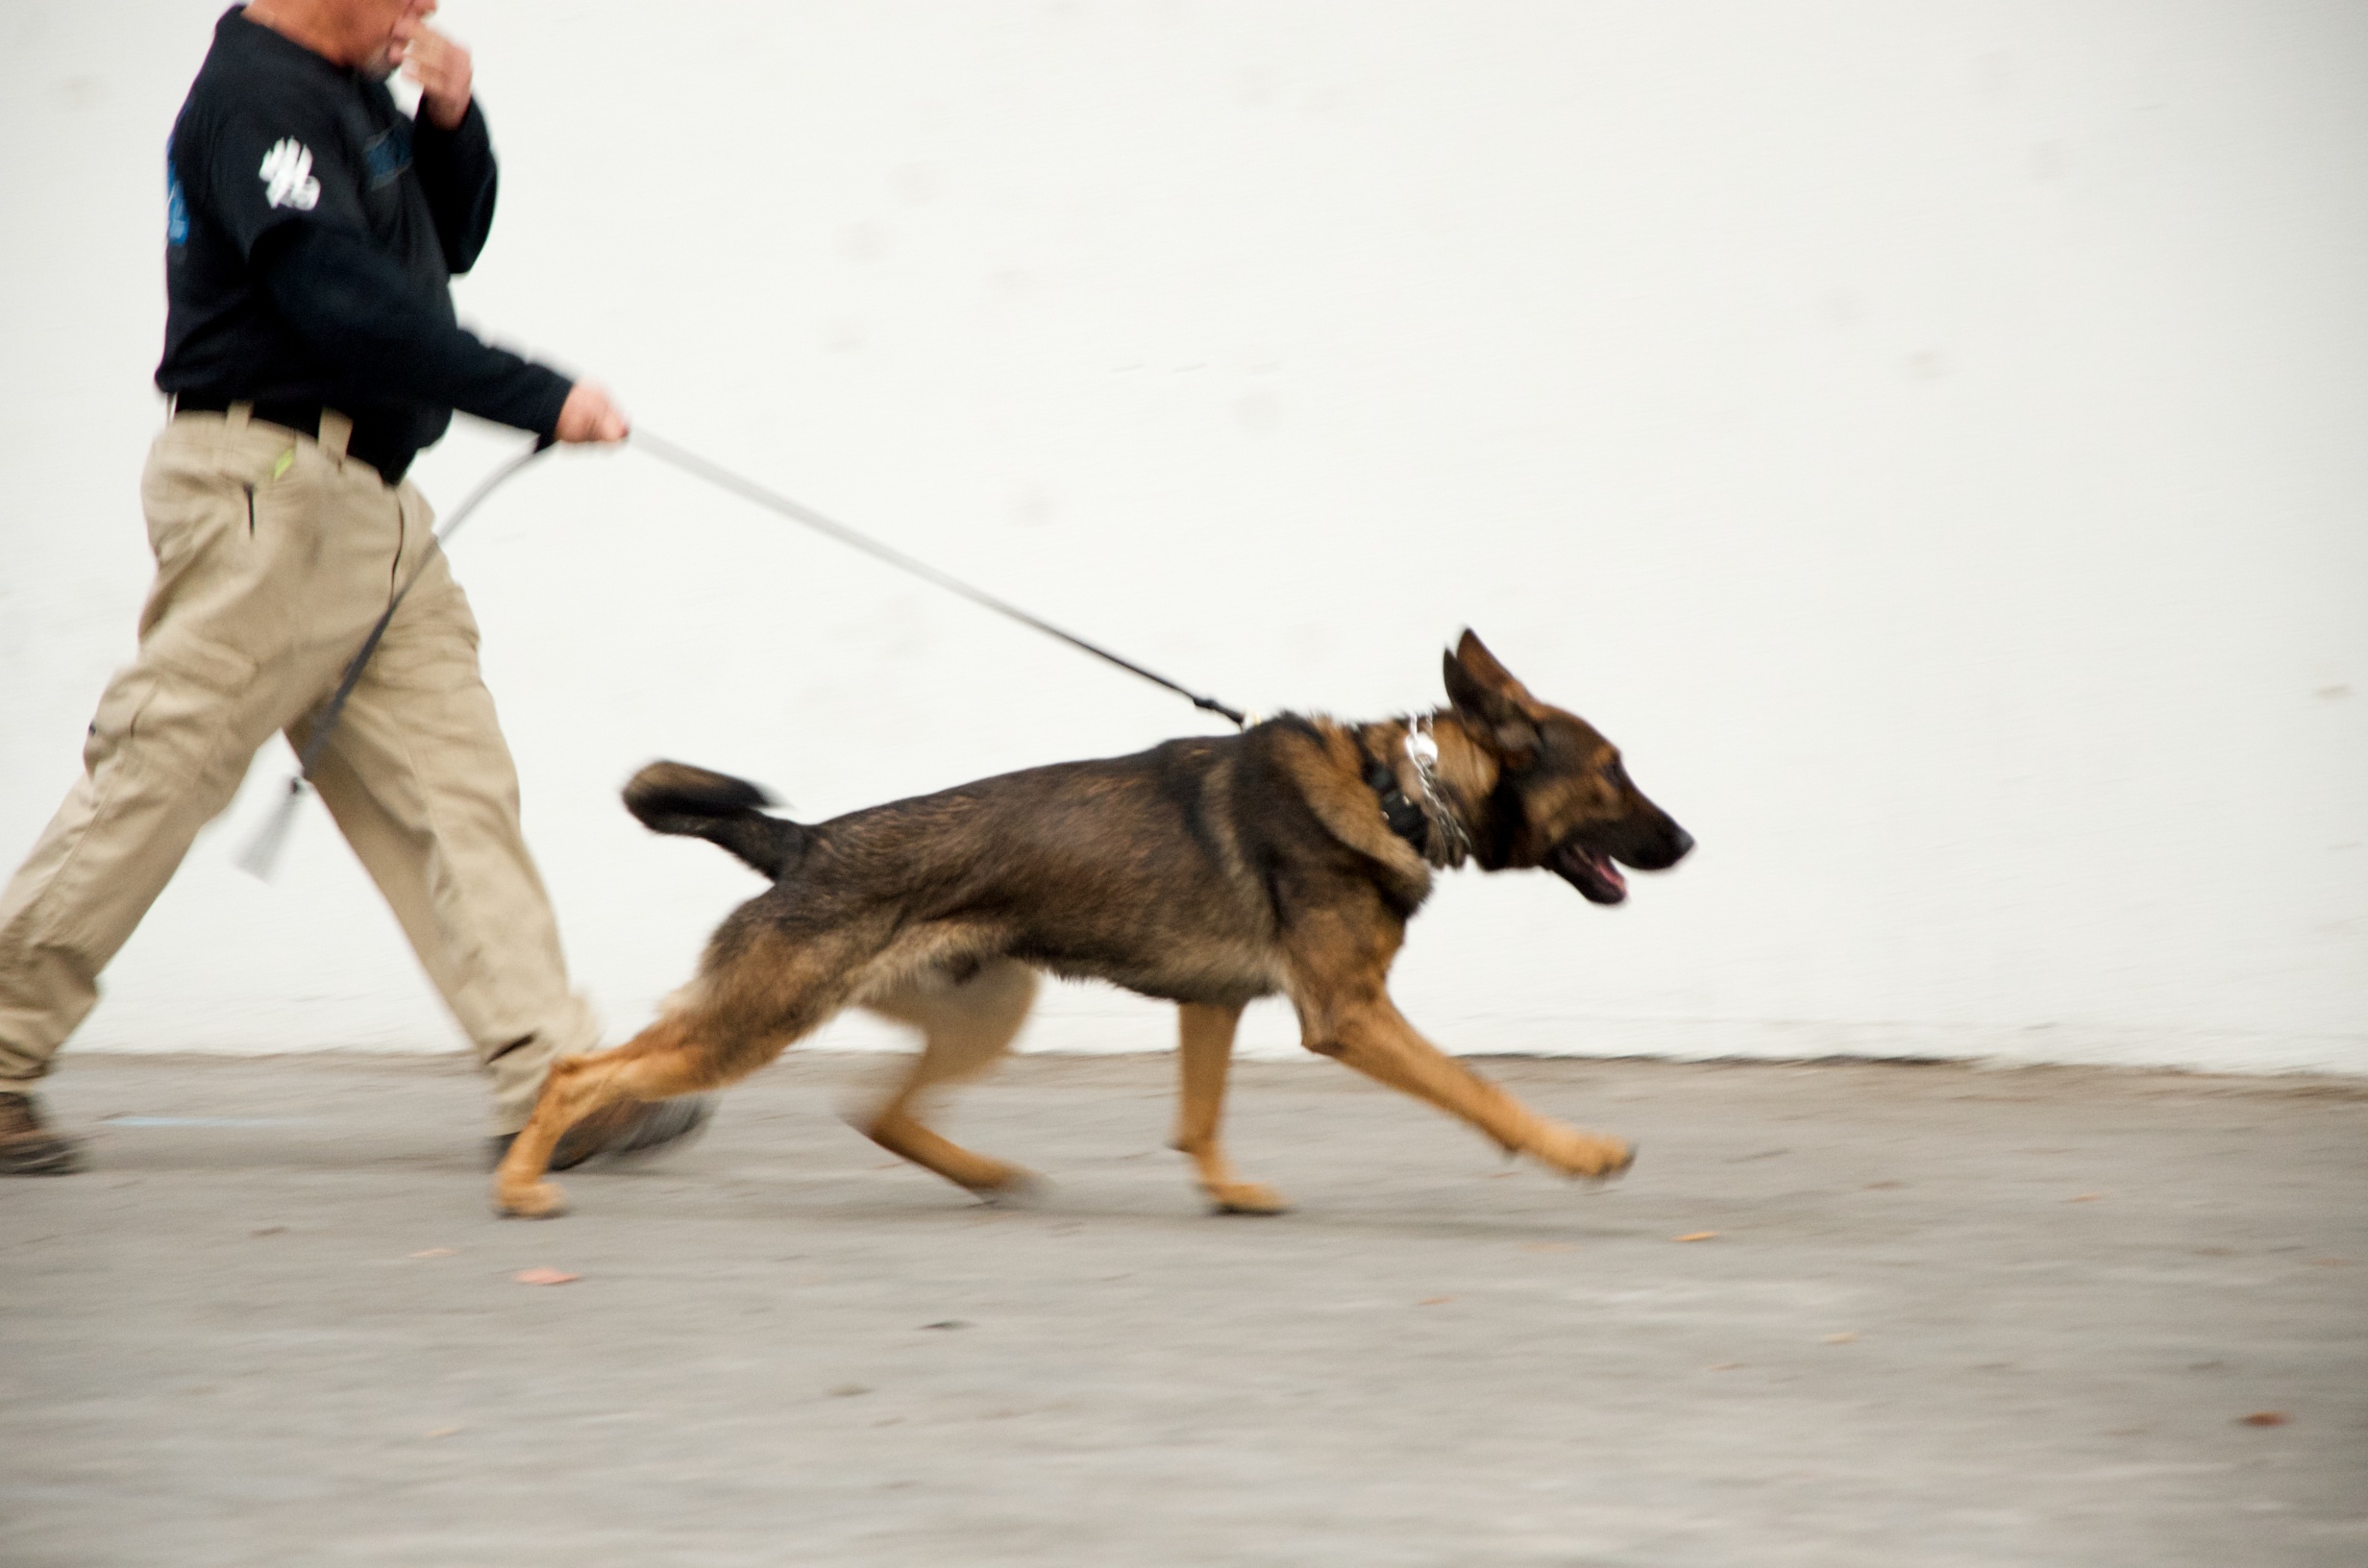 A bomb detection K9 hard at work